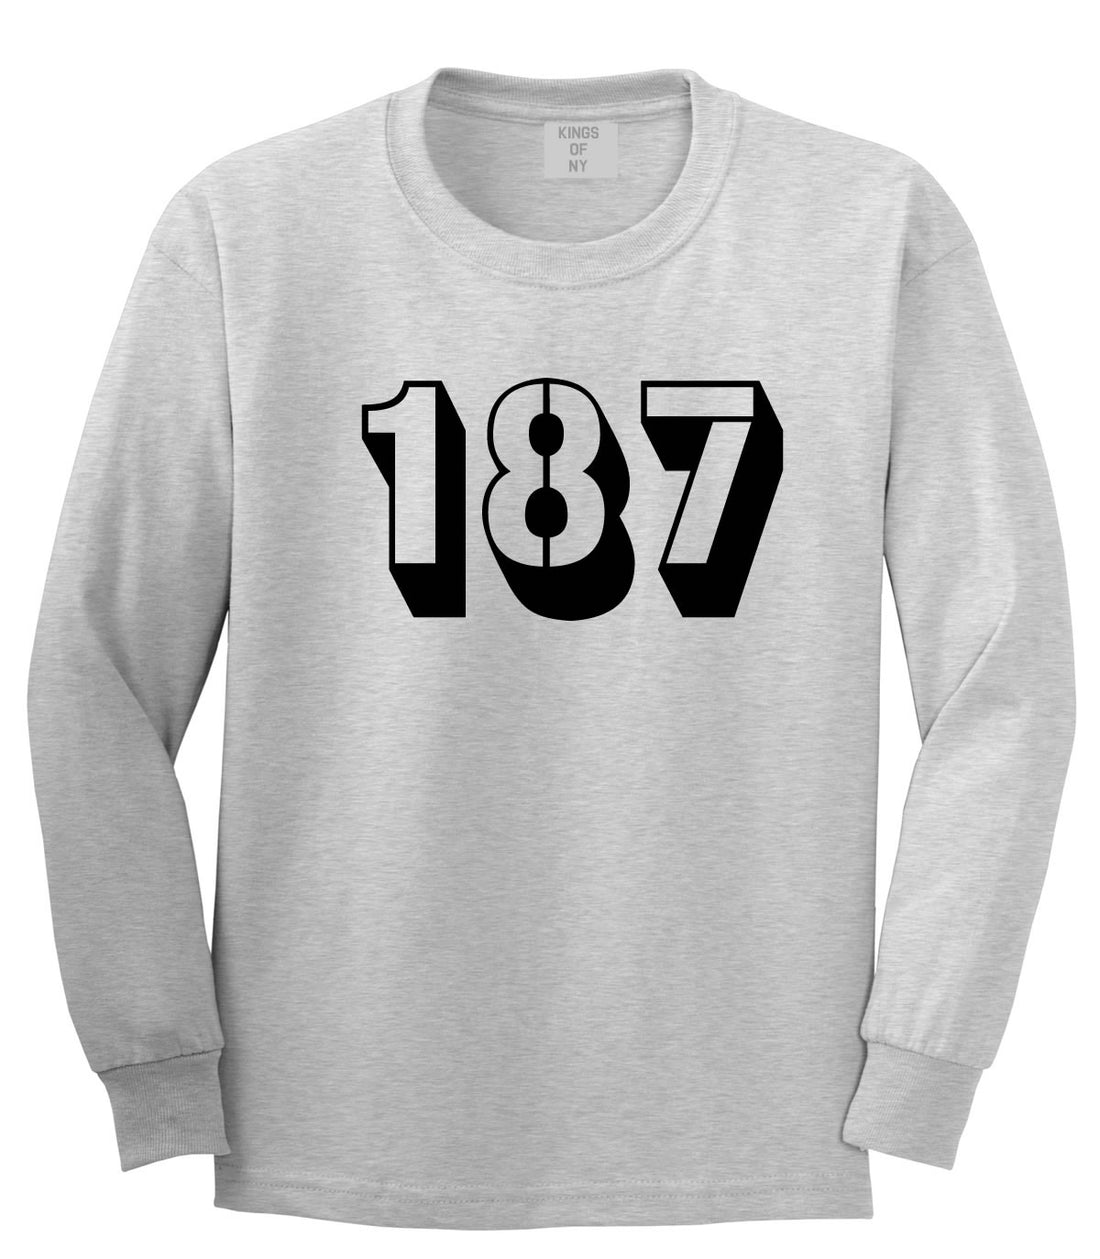 187 Long Sleeve T-Shirt in Grey by Kings Of NY